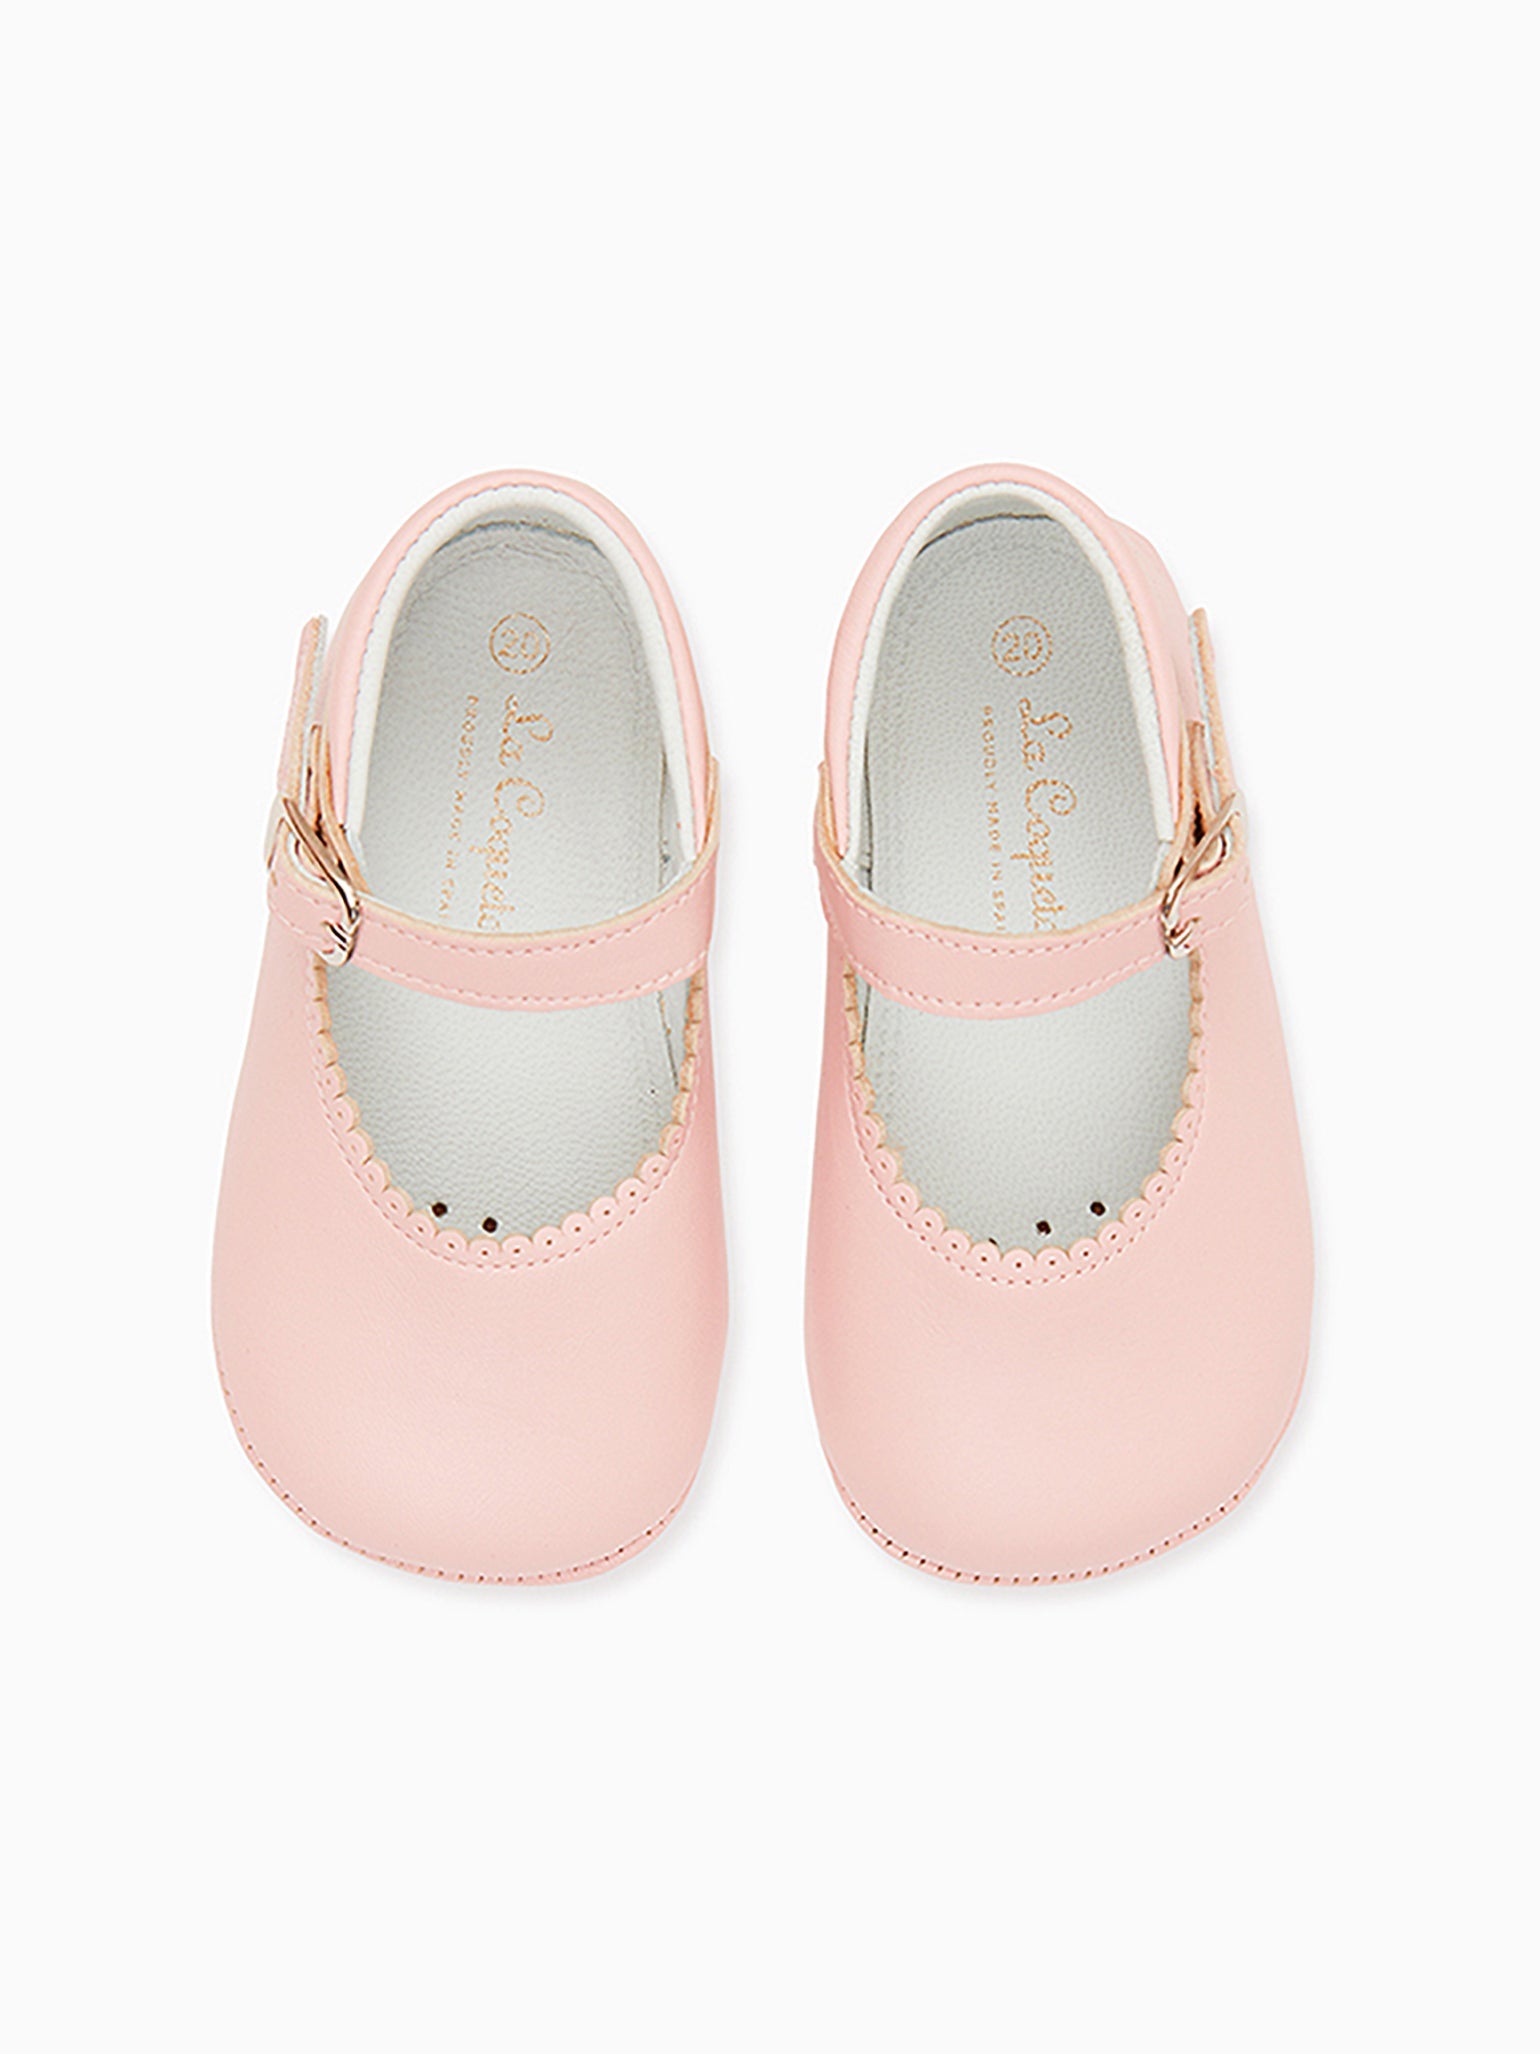 Light Pink Leather Baby Mary Jane Shoes